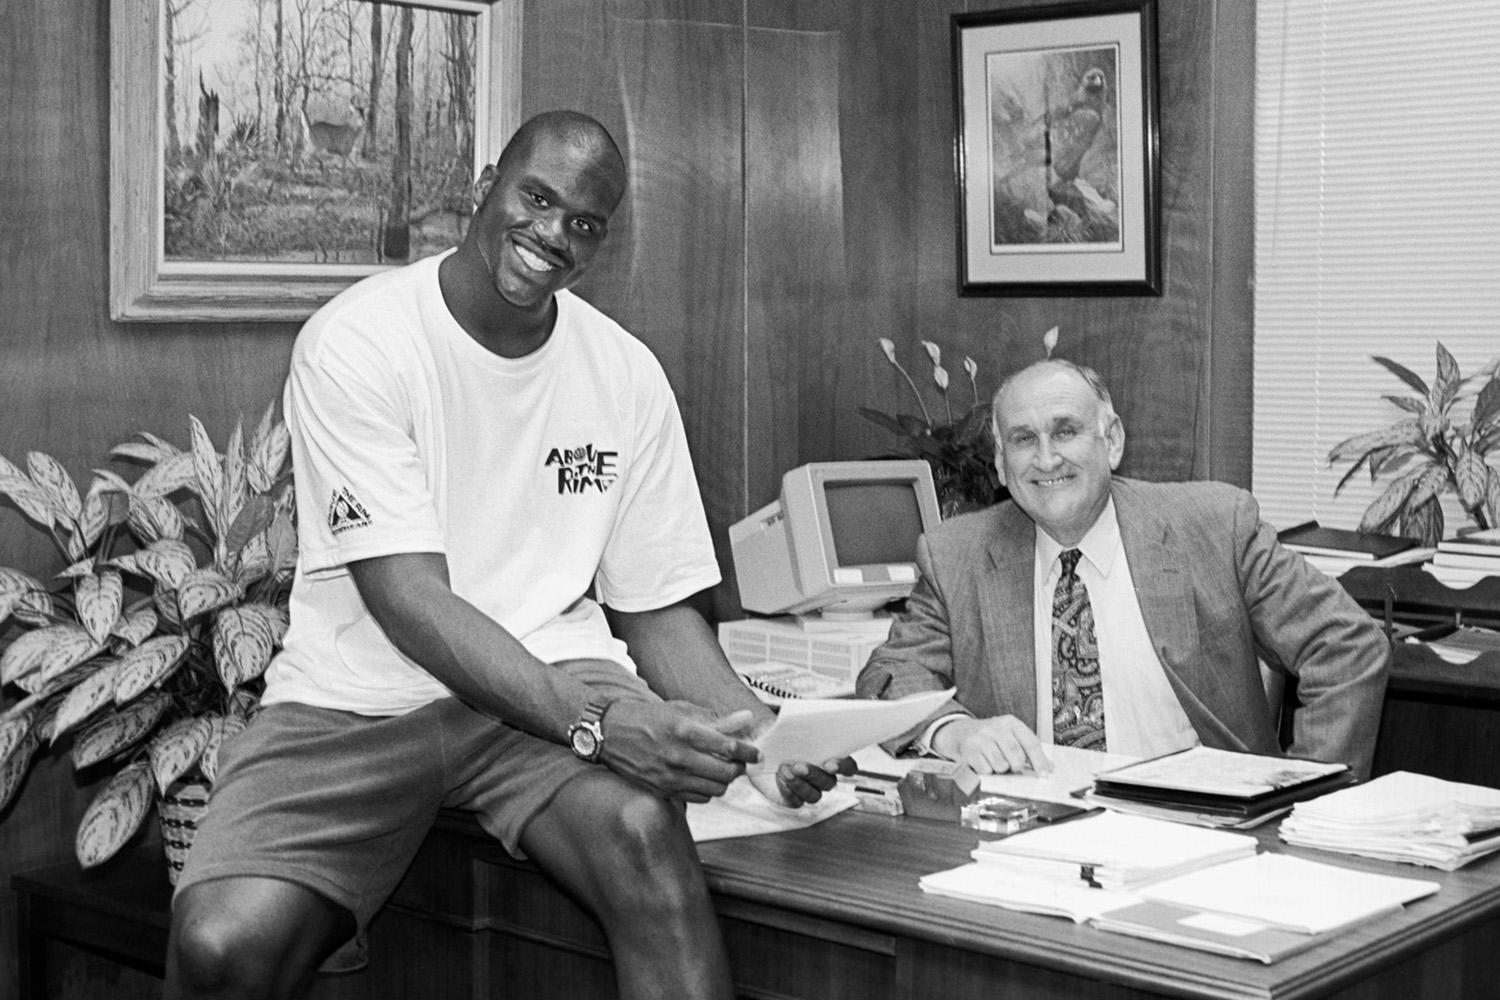 Shaquille O’Neal with former Chancellor William Jenkins in the 1990s